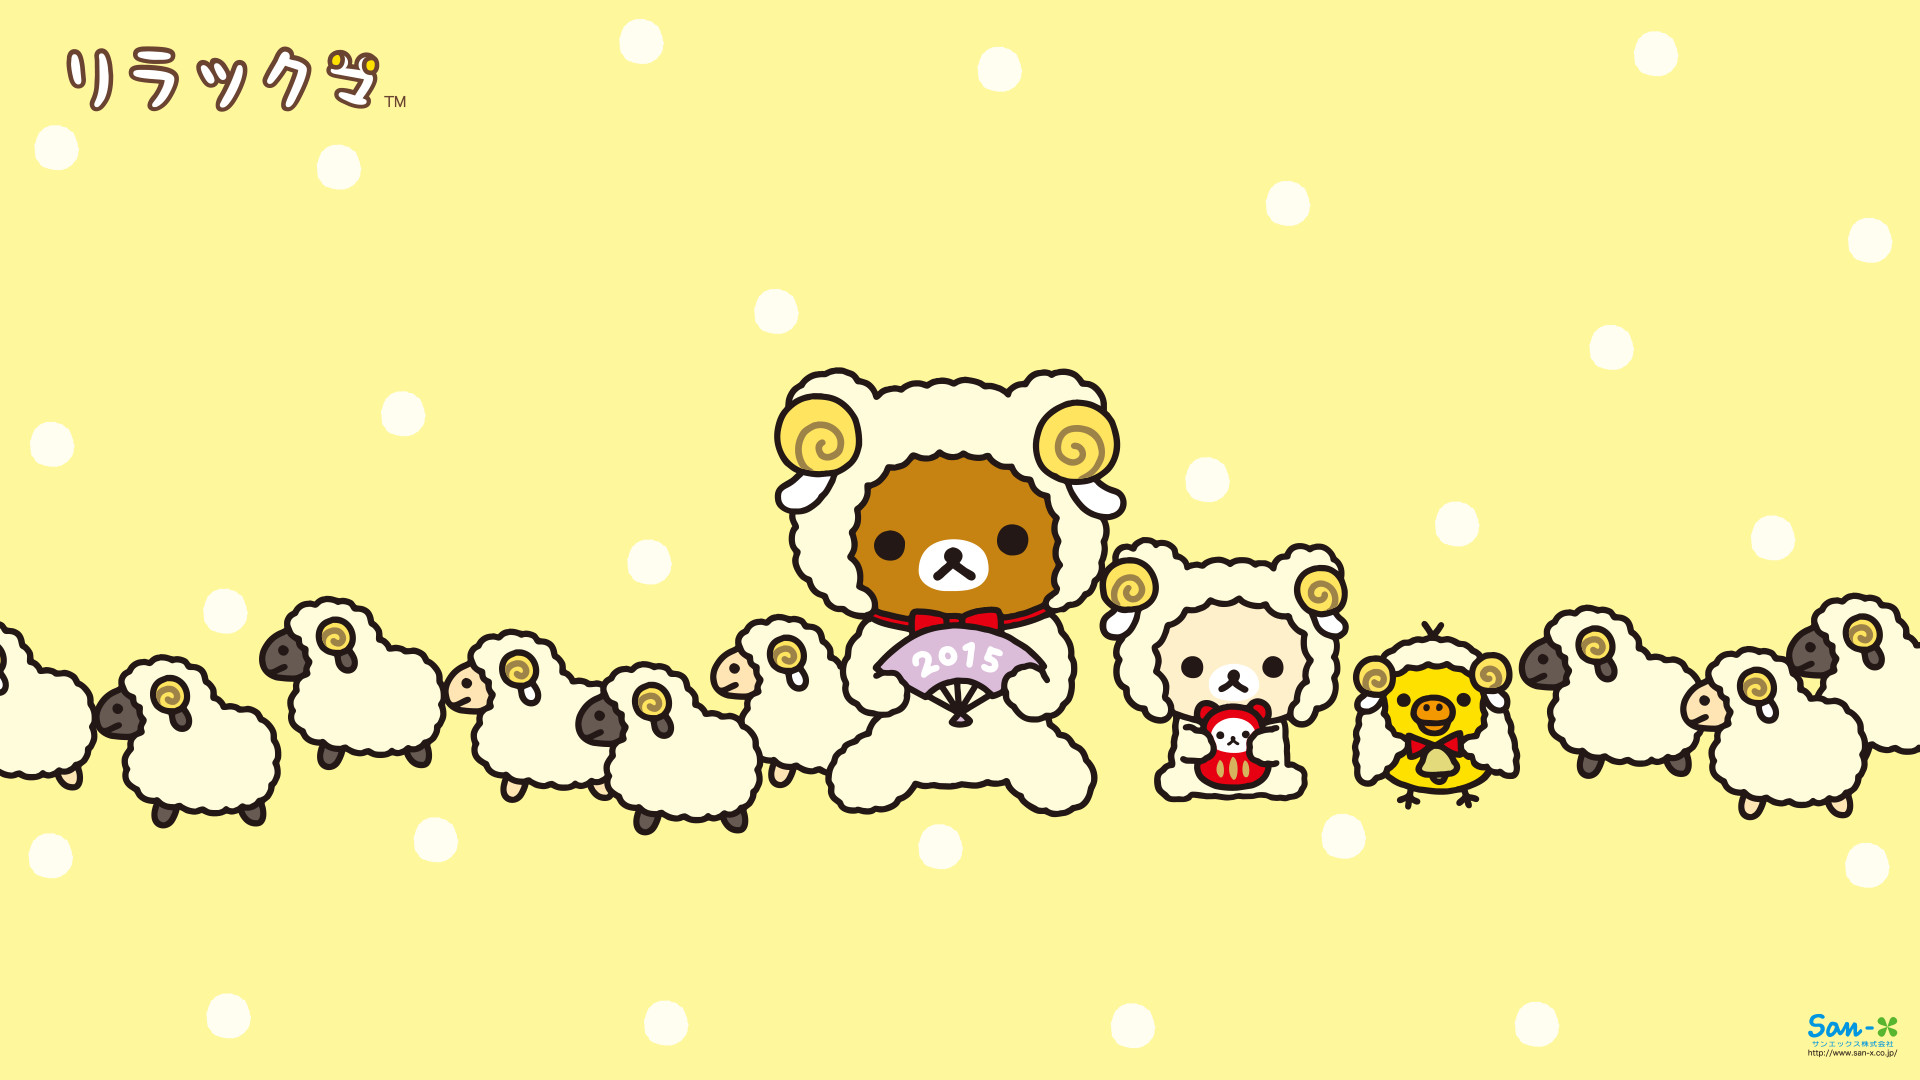 1920x1080 Happy Year of the Sheep - you can download this wallpaper for free